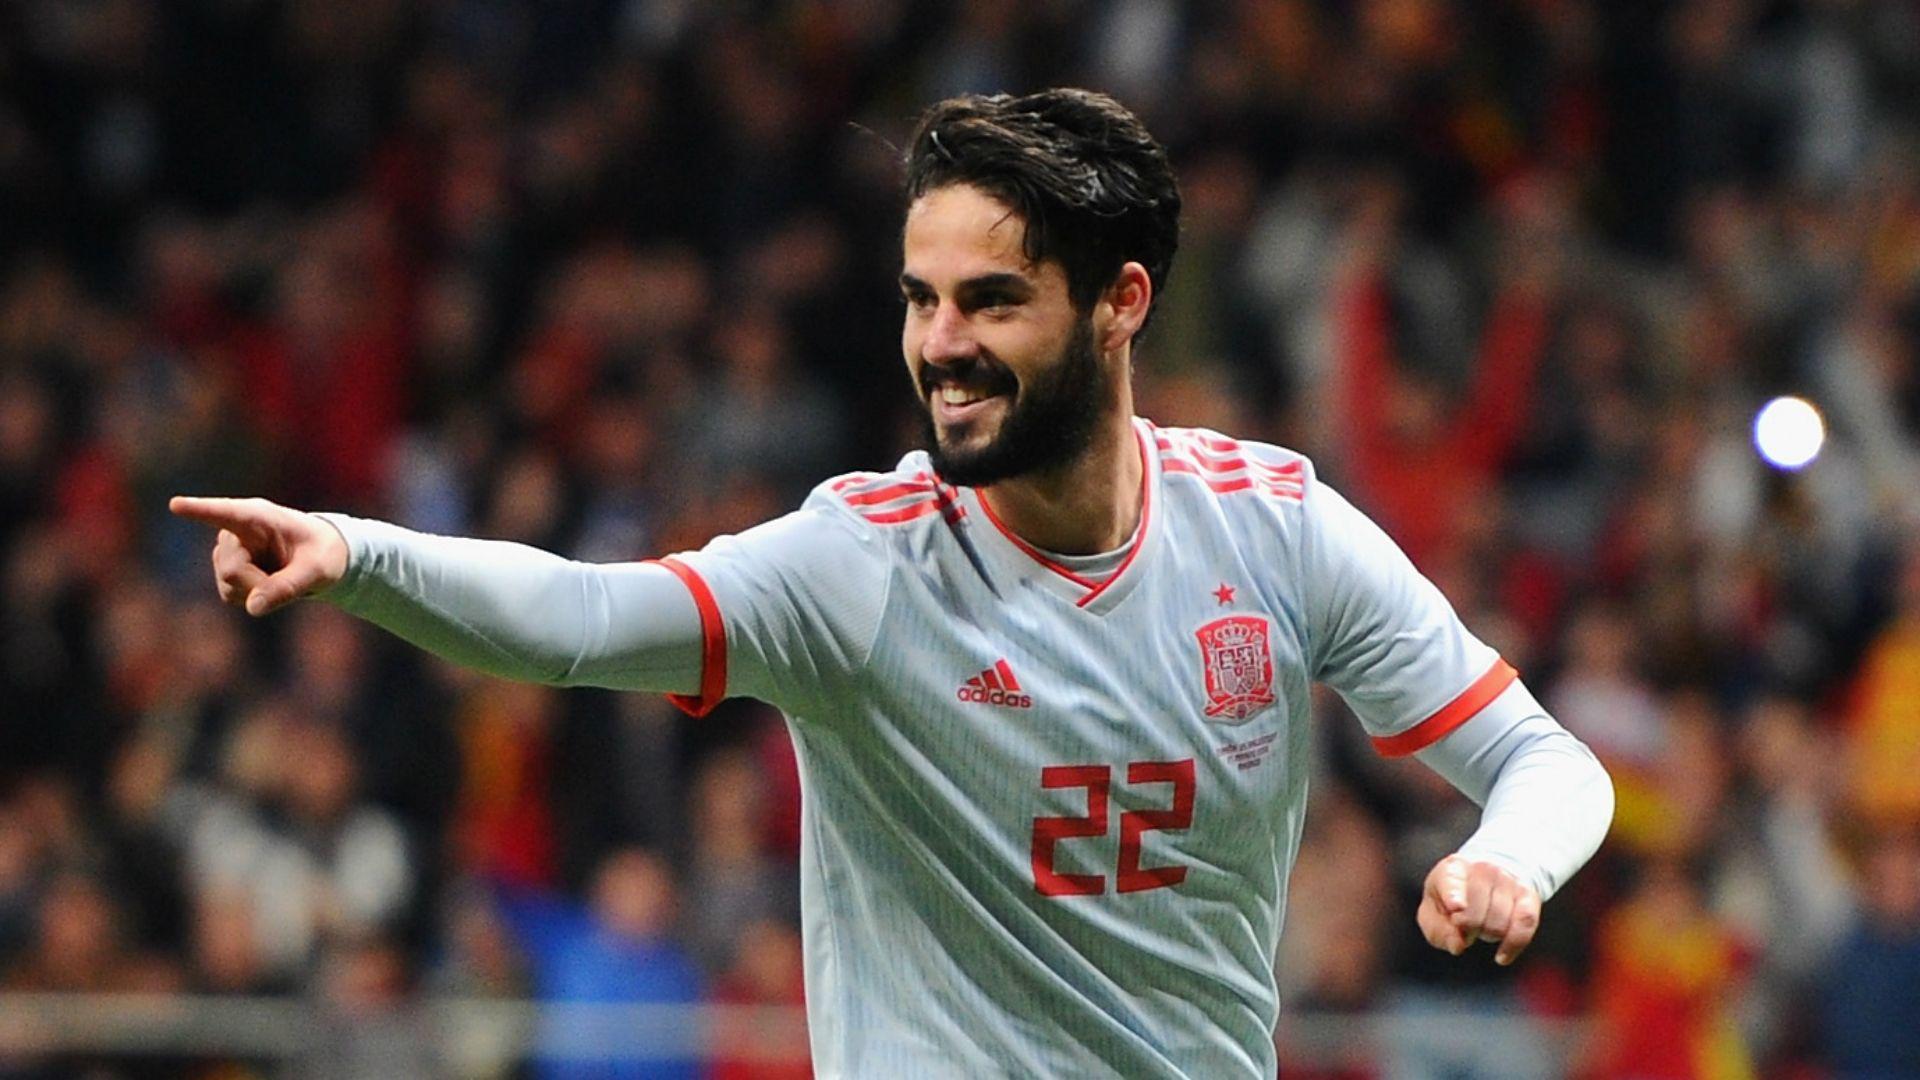 Isco An Important Player For Real Madrid- Zinedine Zidane